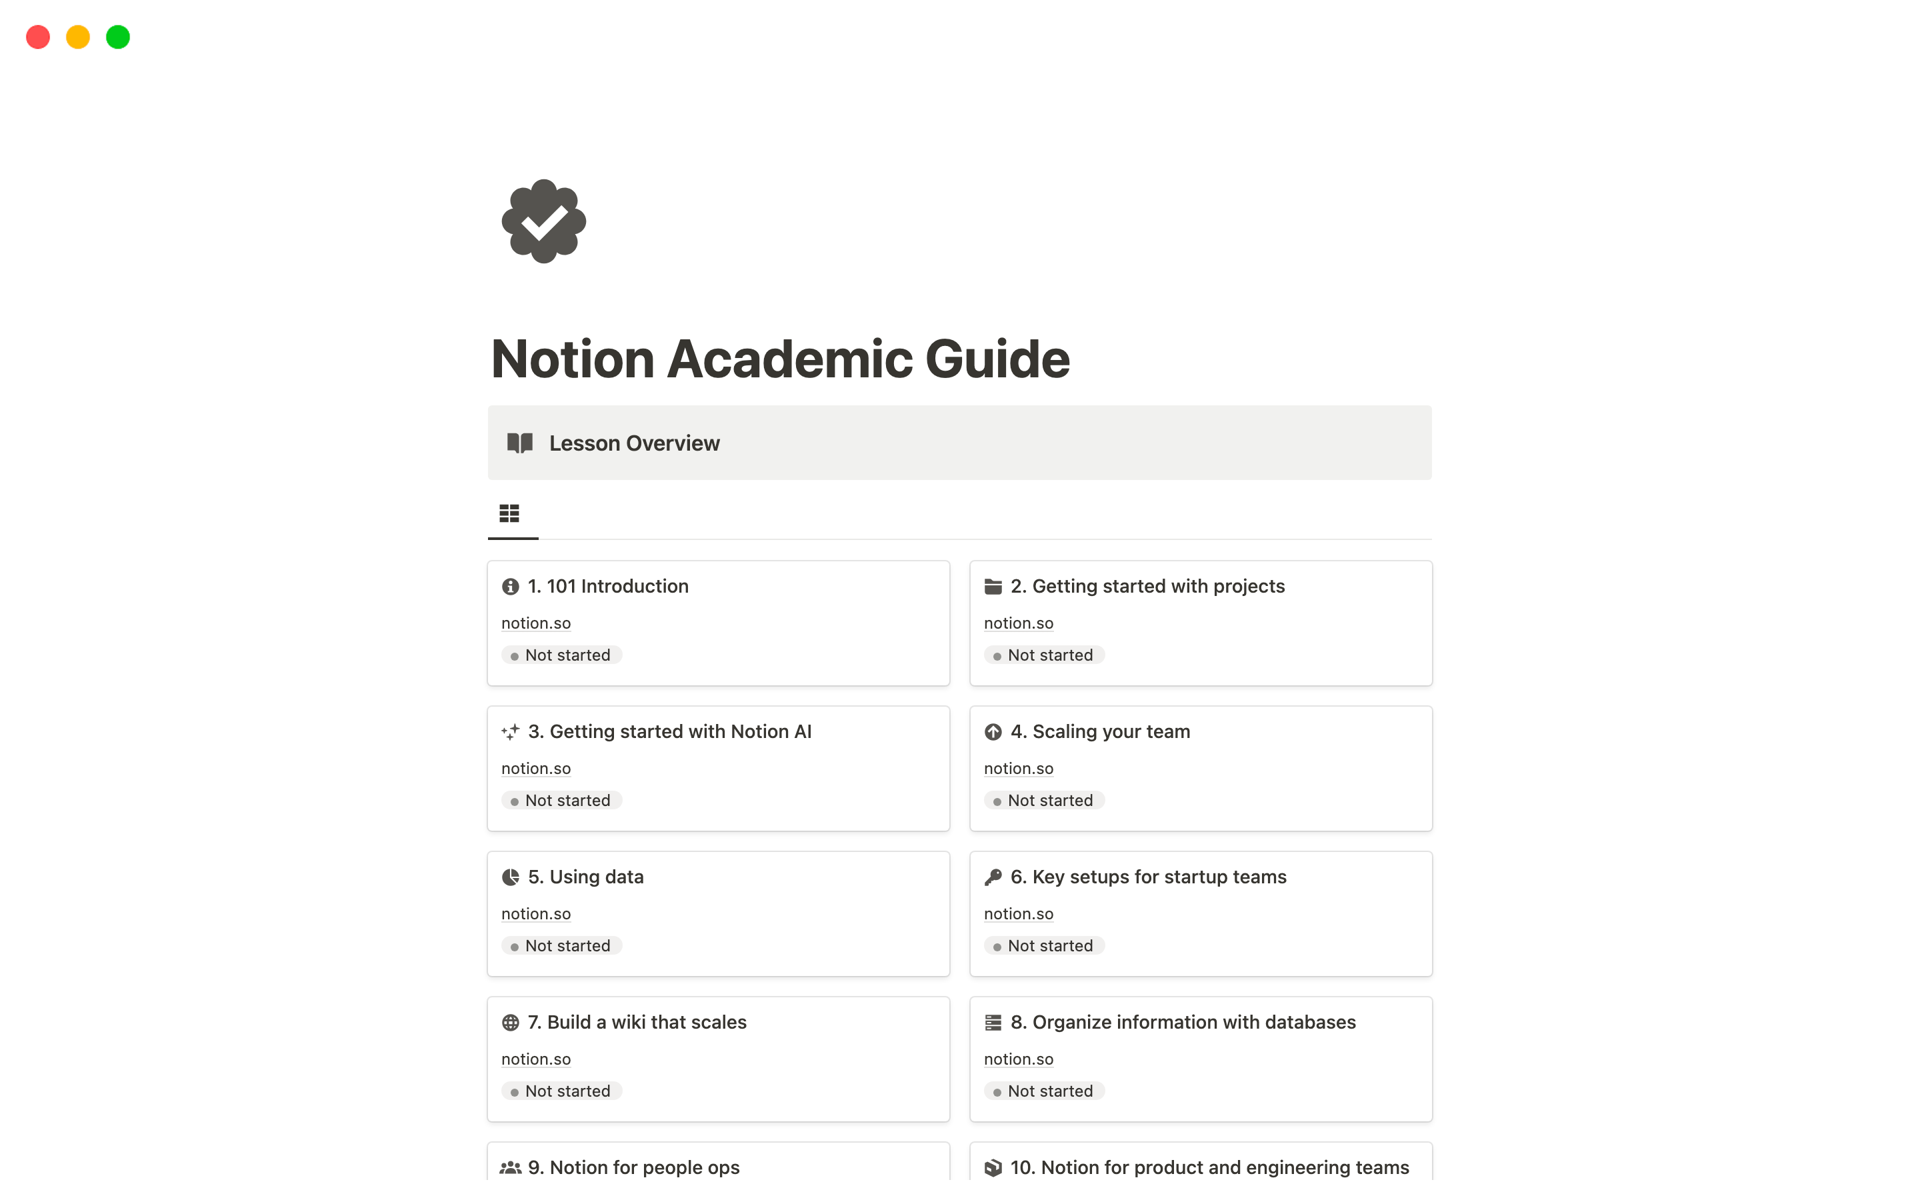 This Notion Guide tracks your progress through Notion lessons and empowers you to take notes with ease.